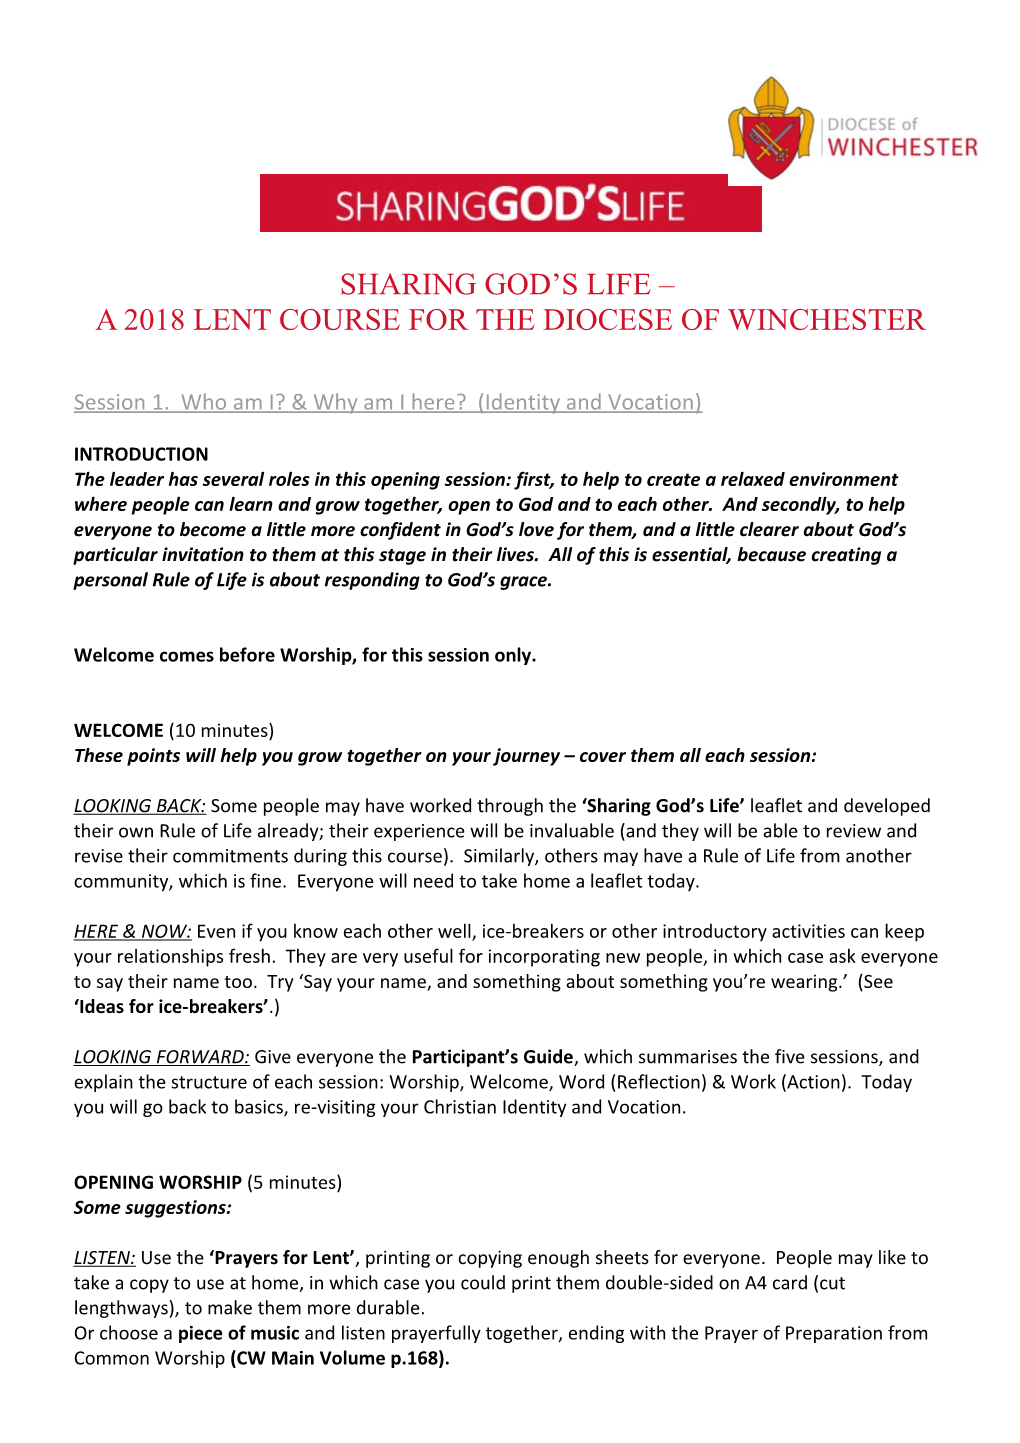 A 2018 Lent Course for the Diocese of Winchester